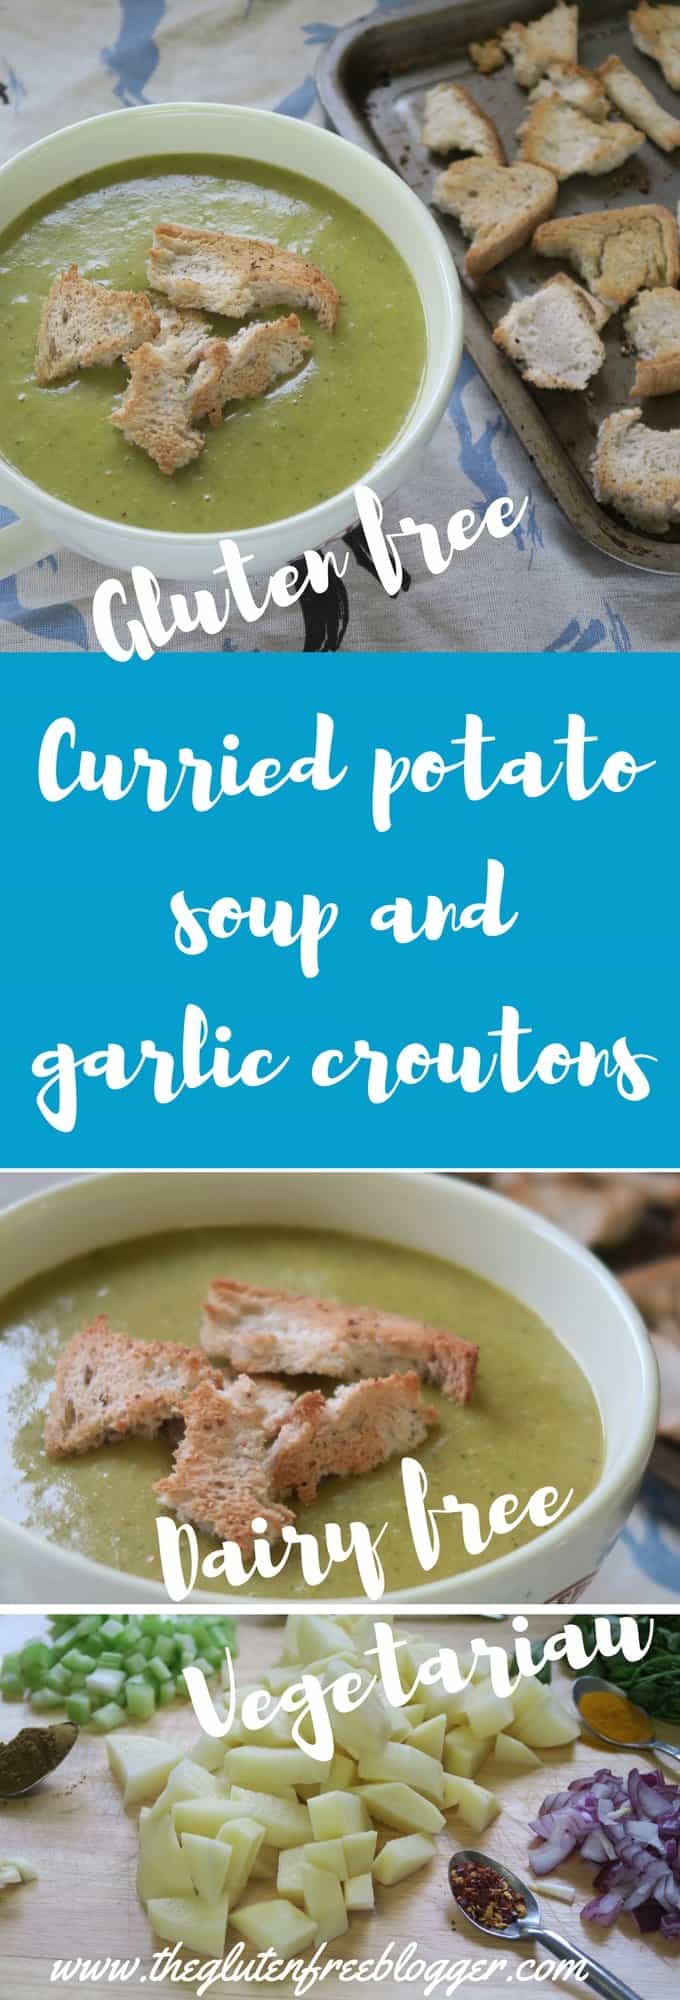 Gluten free soup recipe - curried potato soup and gluten free croutons - dairy free and vegetarian - www.theglutenfreeblogger.com